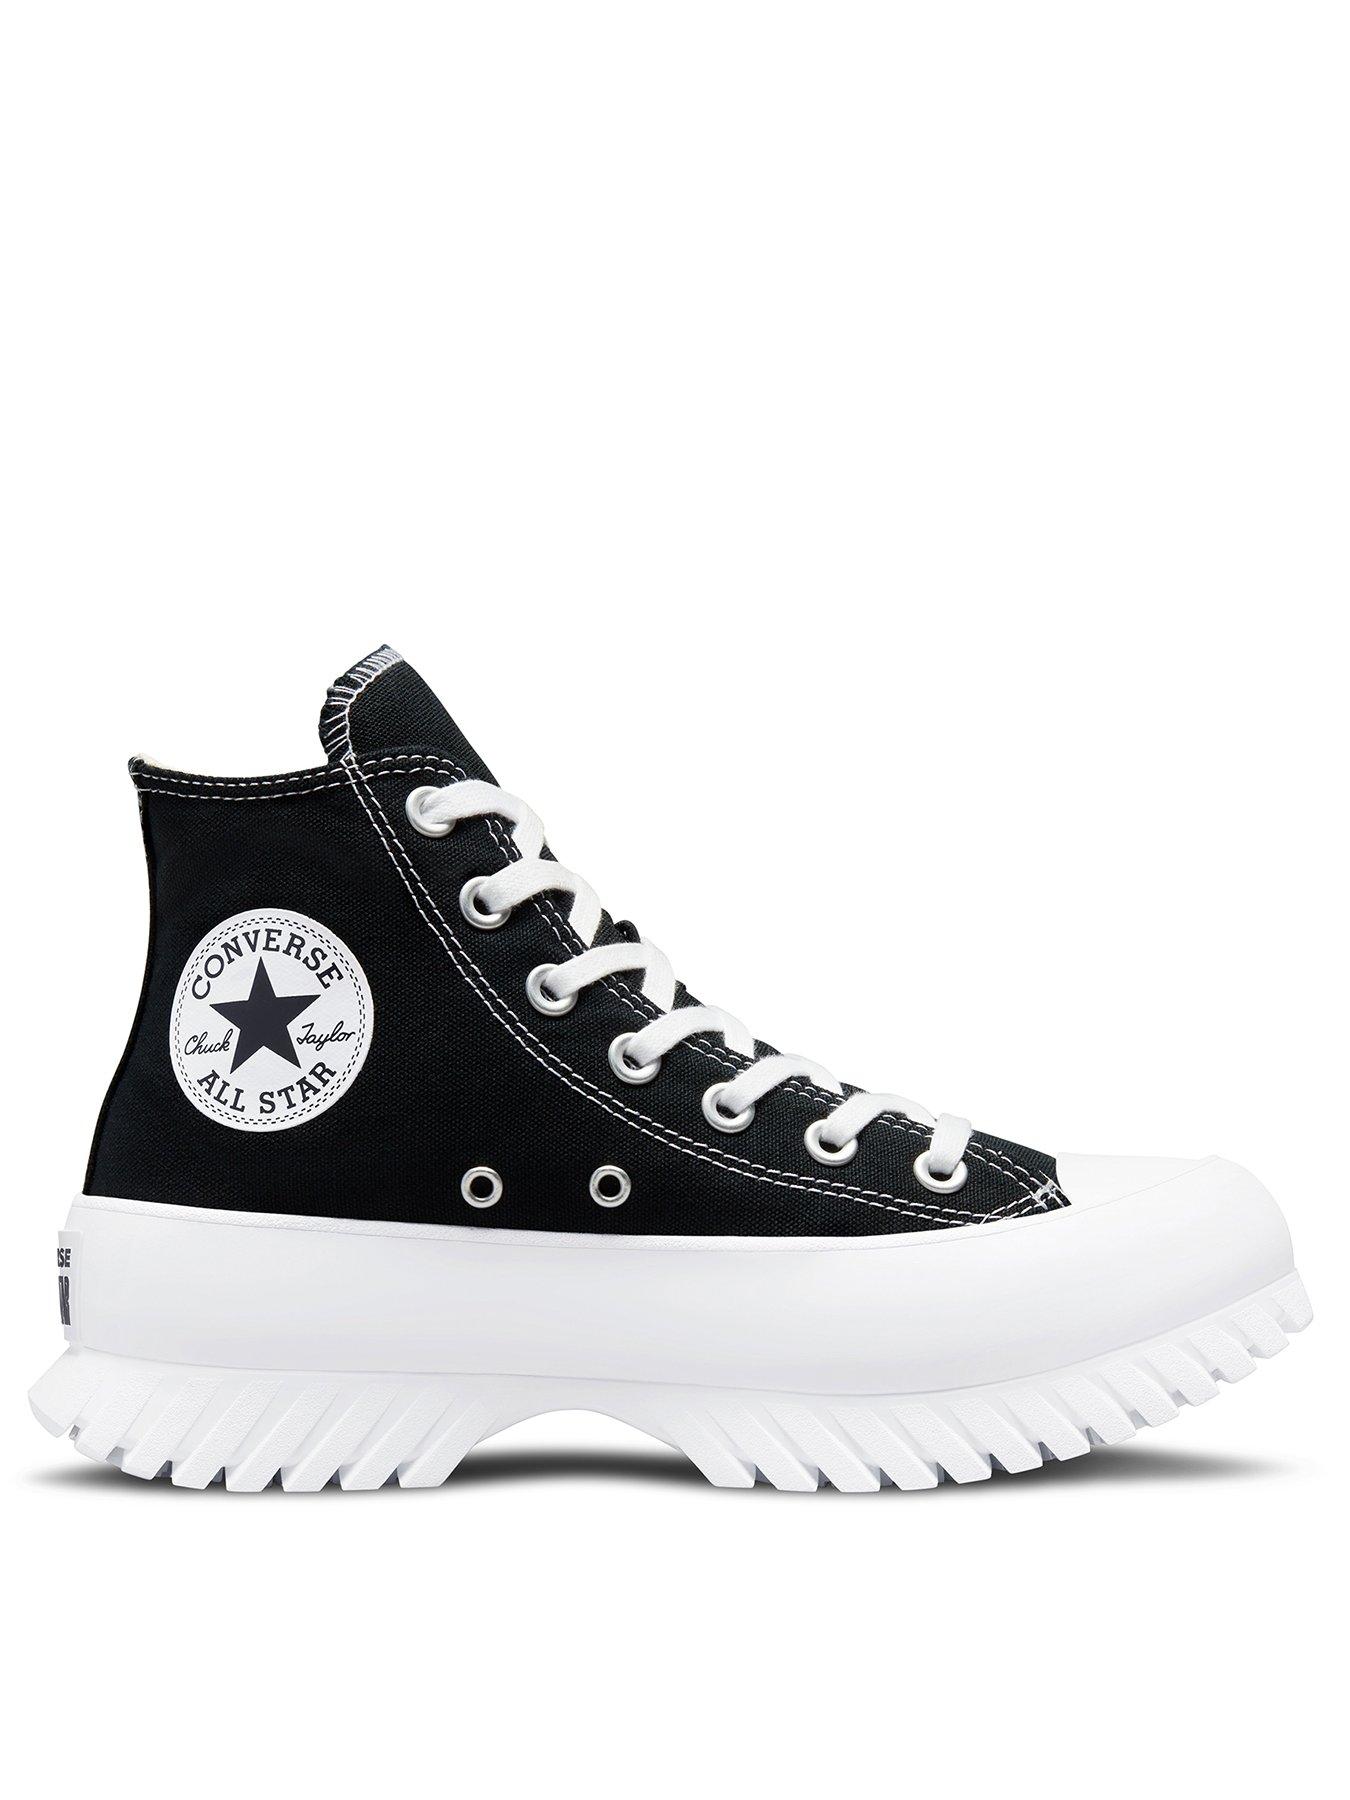 The Ultimate Chuck Taylor Sneaker Review: How to Clean, Style, and Work Out